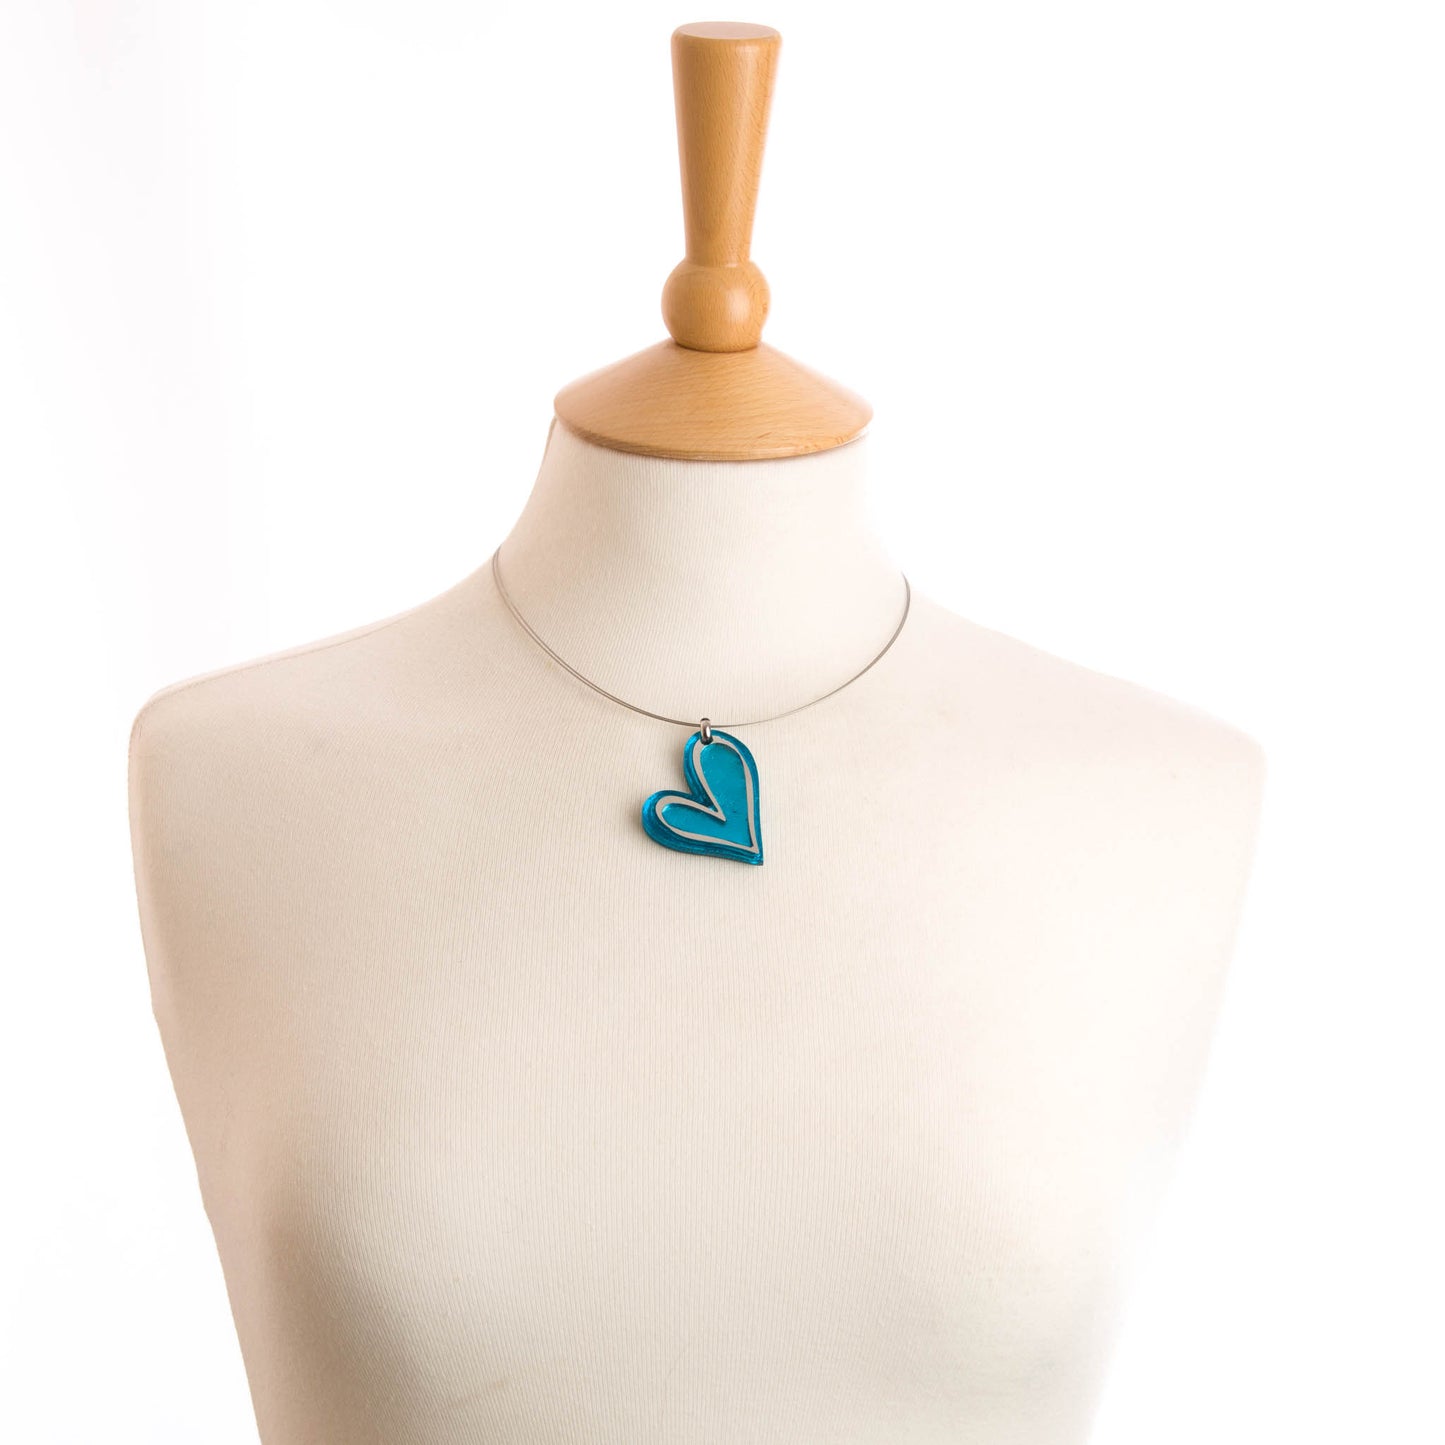 Watch this Space Necklace, Linear Hearts Collection, Turquoise/Silver